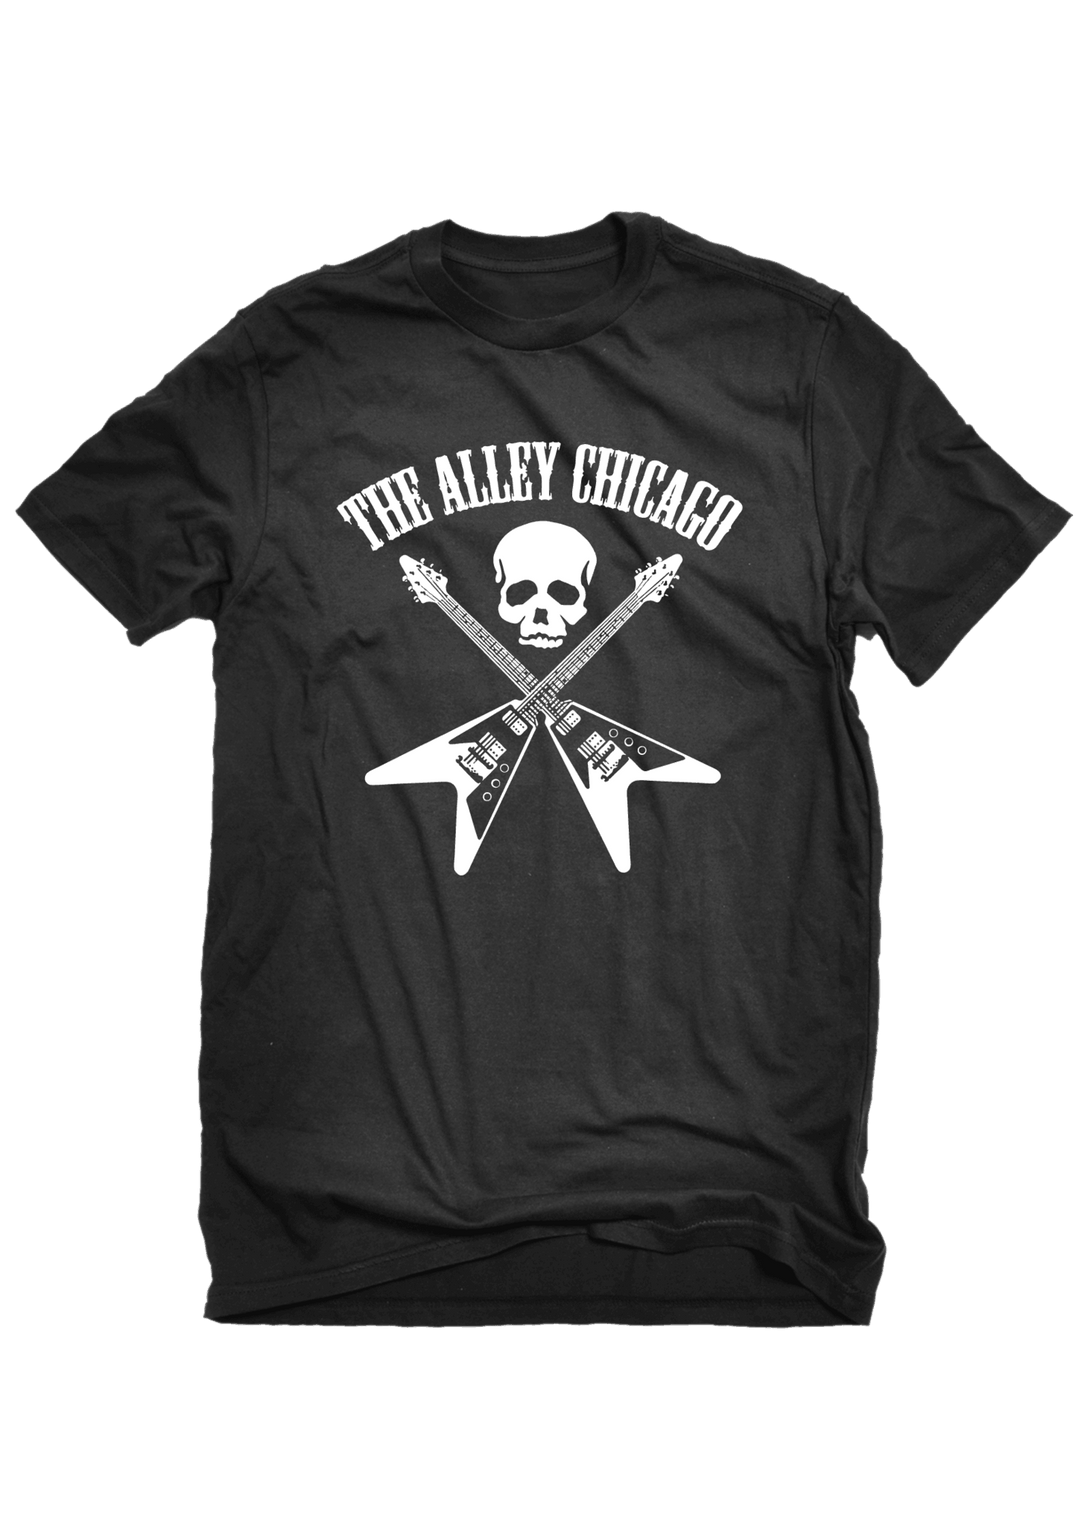 The Alley Flying V Guitars Tshirt - The Alley Chicago